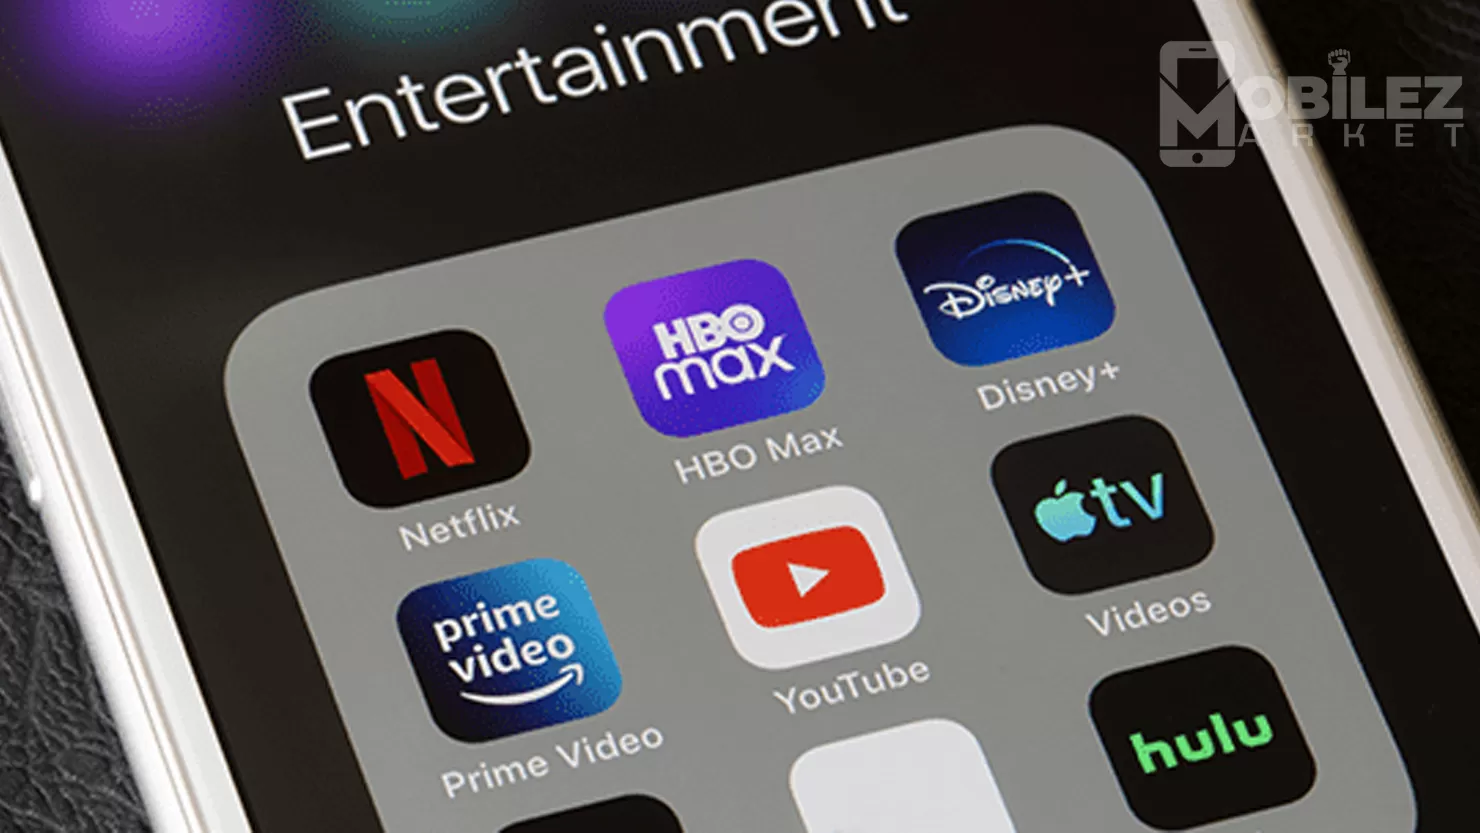 "Mobile Entertainment: Streaming Services and On-Demand Content"